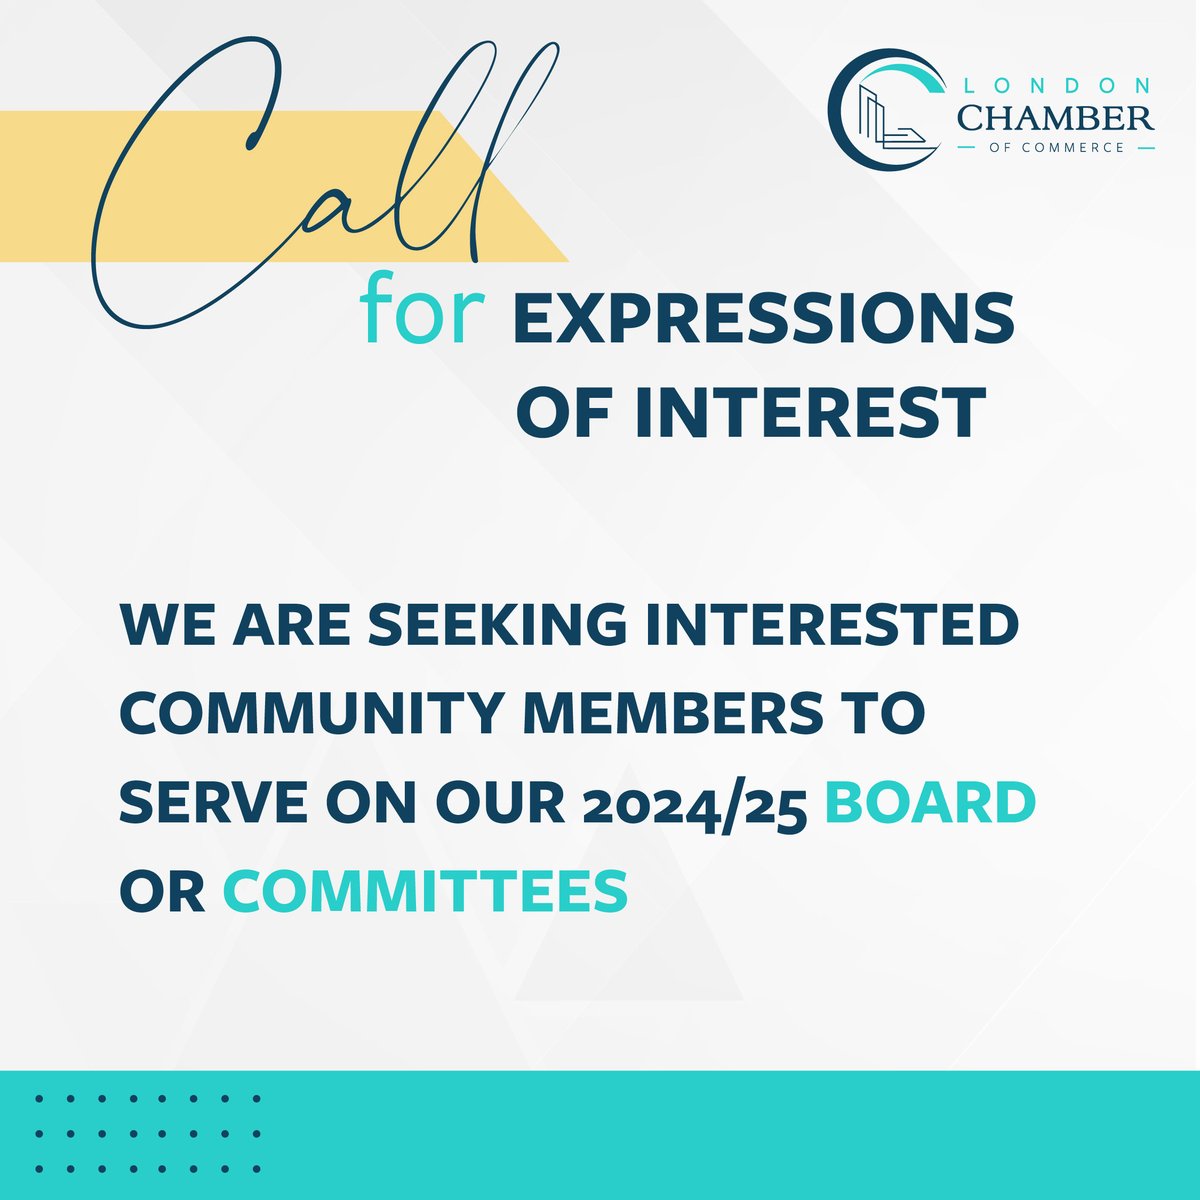 Expressions of interest are due April 30! Shape London's business landscape by applying for our 2024/25 Board or Committees. Learn more: londonchamber.com/call-for-expre…